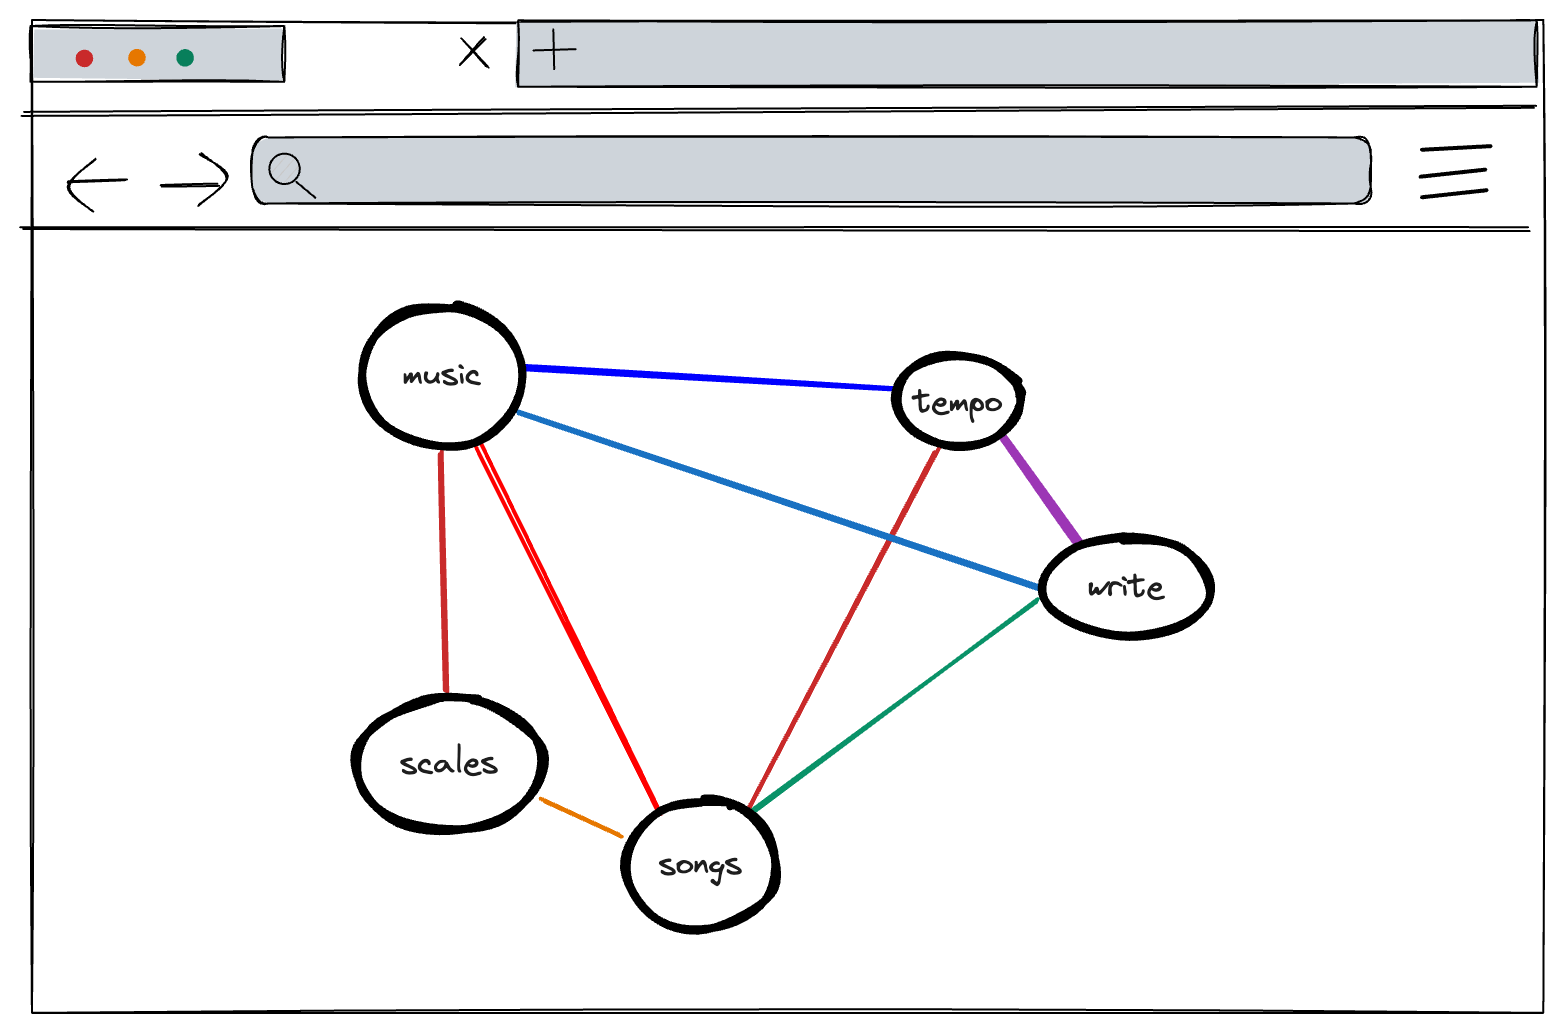 Website mockup showing a graph with five nodes, music, tempo, write, songs, and scales. Each node is linked to 2 to 4 other nodes, but there is a lot of white space and the page appears very empty.